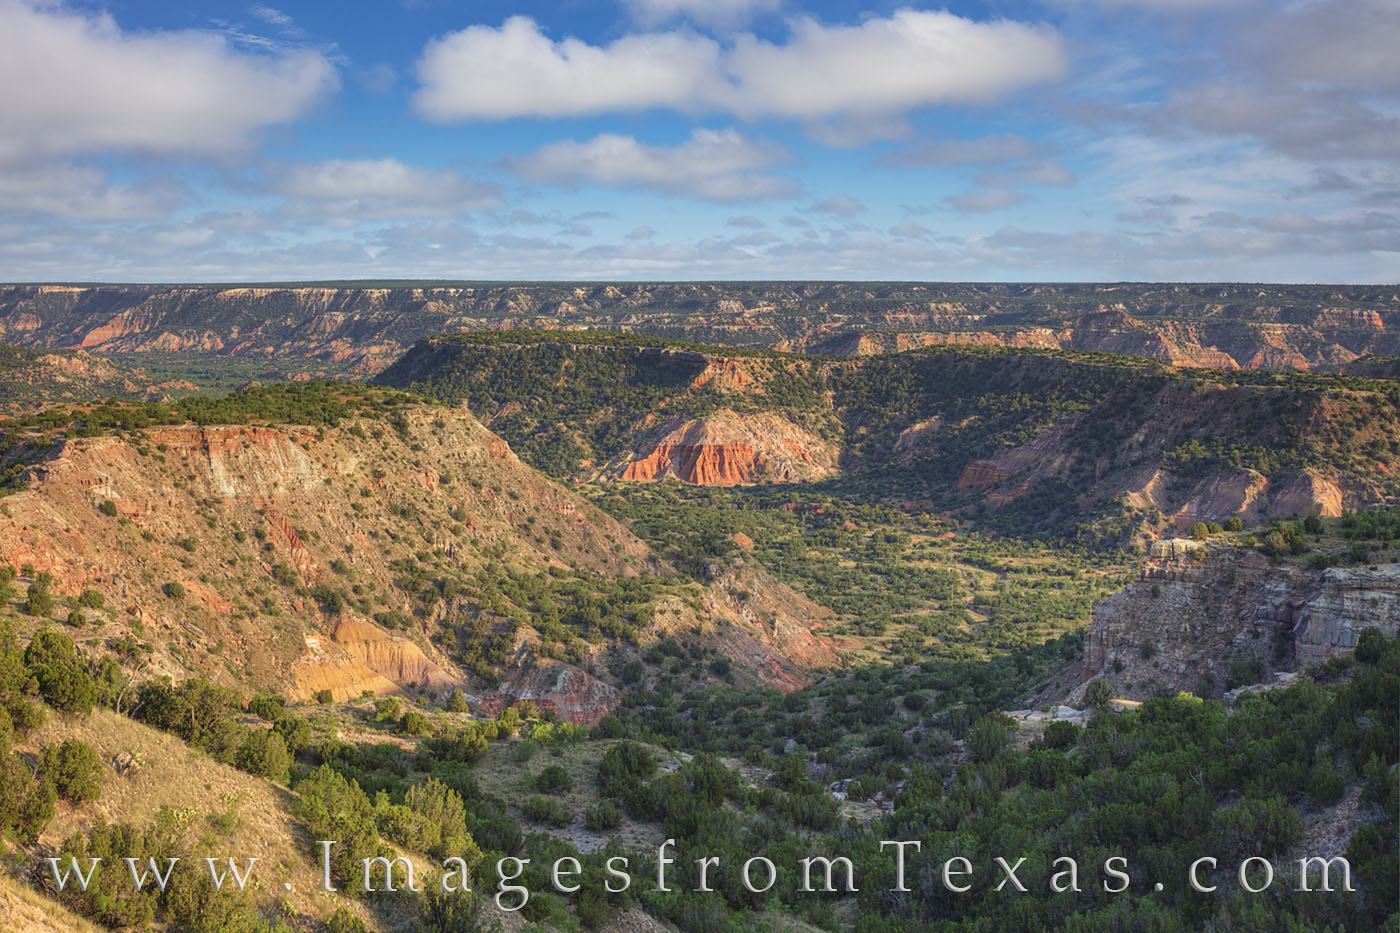 From an overlook just off the main road in Palo Duro Canyon, this view looks east and shows the canyon and its colorful rock...